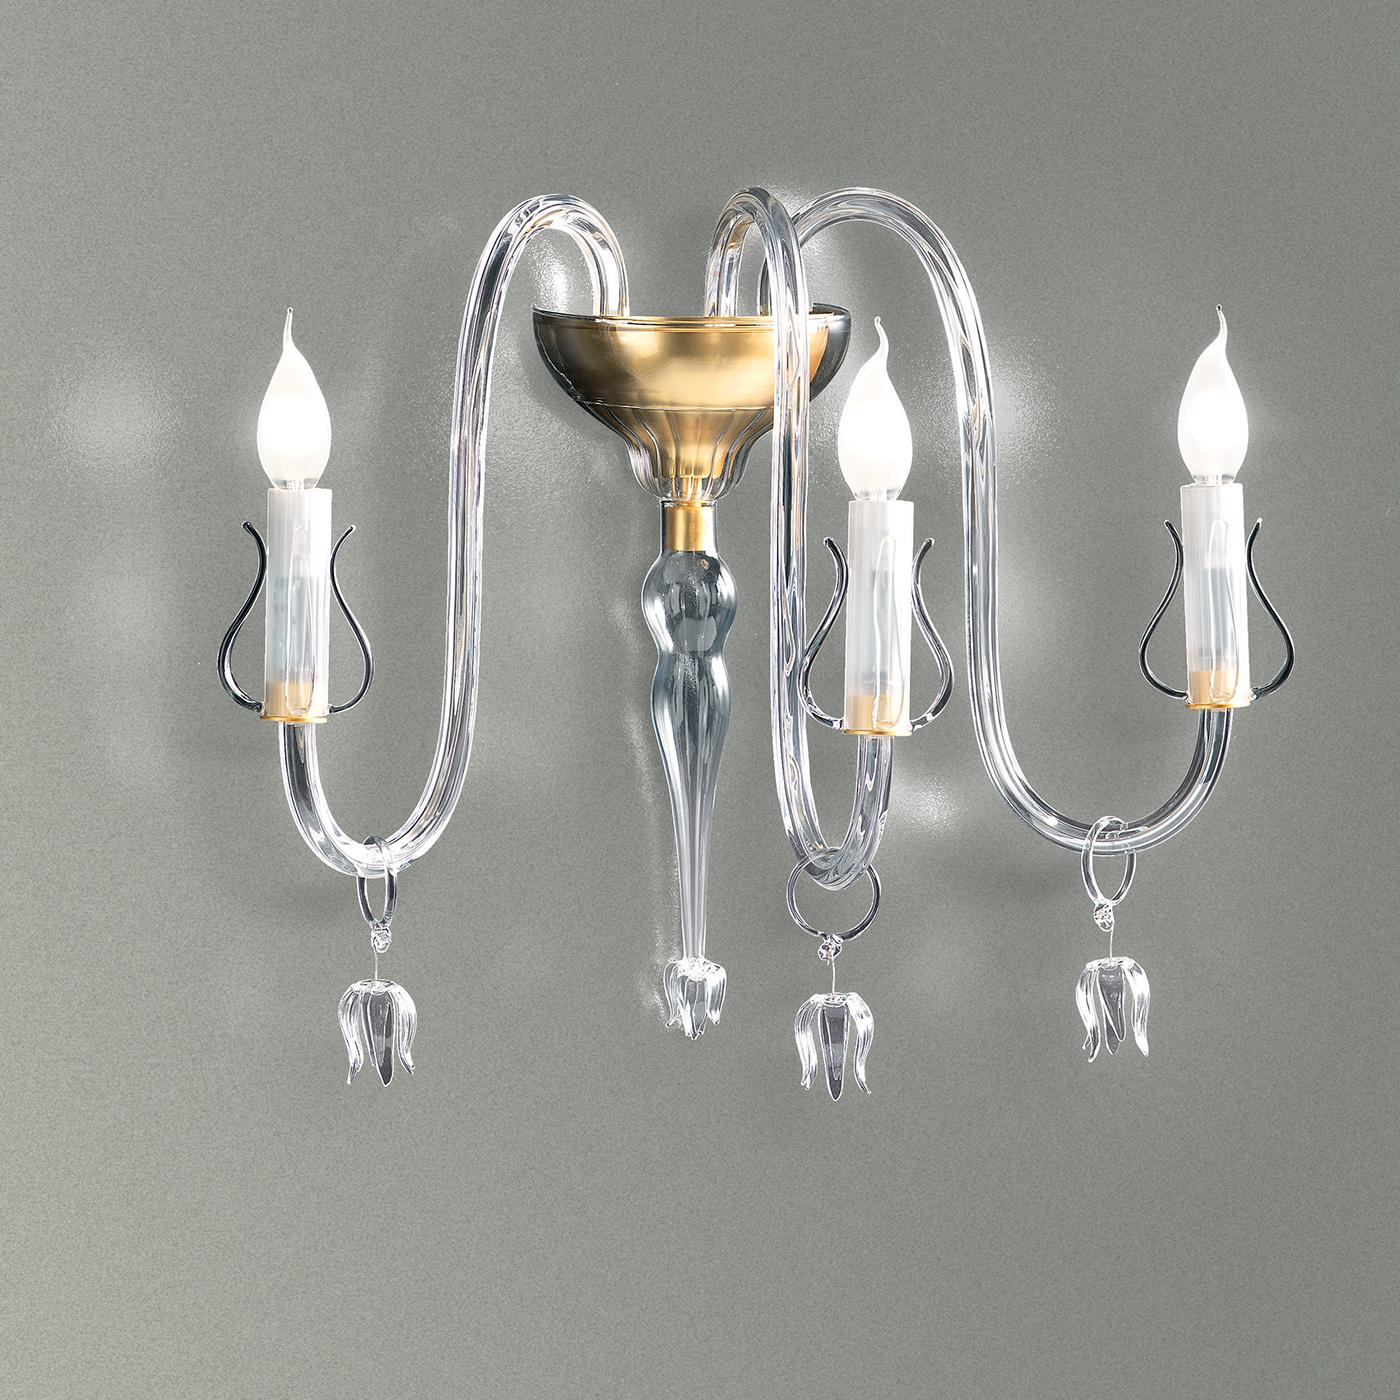 Featuring a matt gold finish on the wall attachment and three candlesticks, the main structure of this simple and delightfully elegant wall lamp is crafted in beautiful clear Murano glass and includes hanging pendants that provide an element of